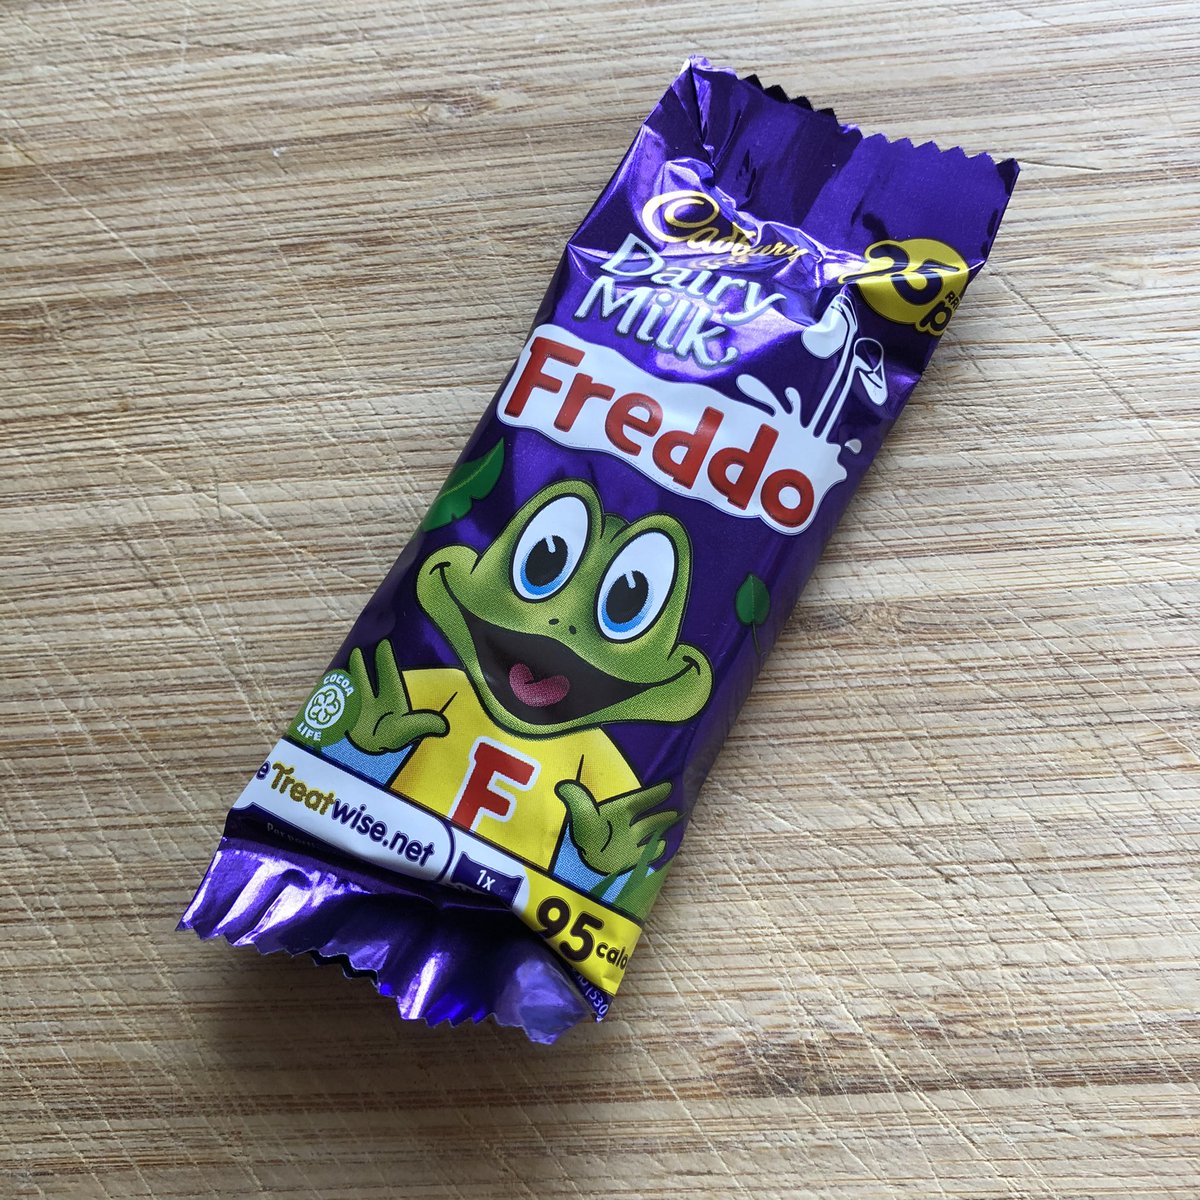 🐸THREAD🍫 The Freddo is possibly the most iconic amphibian-themed chocolate bar you can buy, but it’s tiny, so we’re now going to try to make the biggest one ever, a MEGAFREDDO